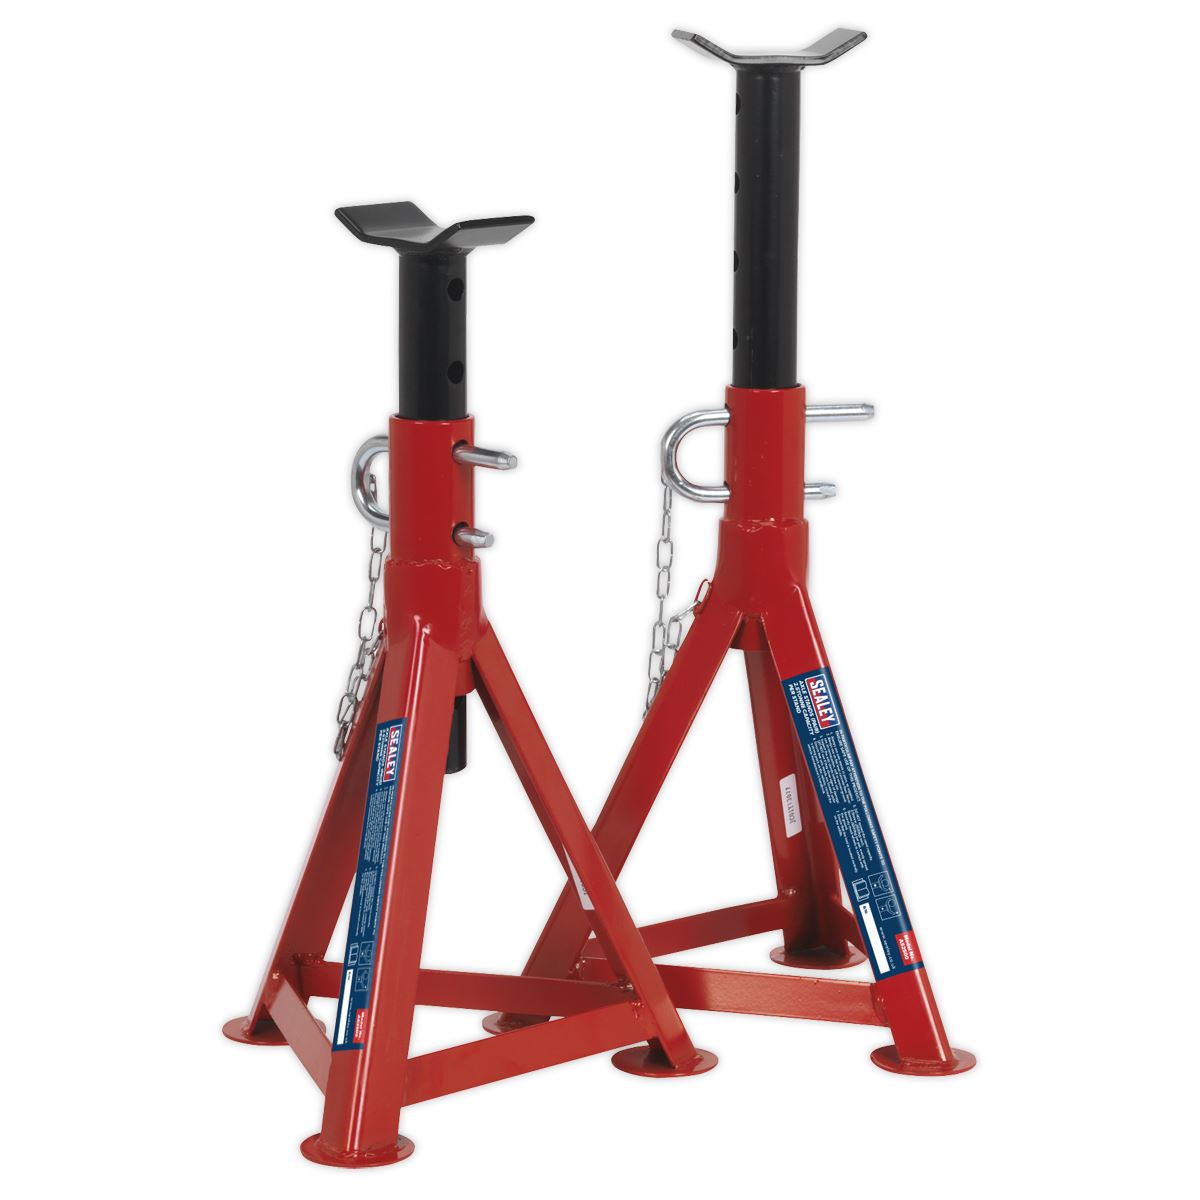 Sealey Premier Axle Stands (Pair) 2.5 Tonne Capacity per Stand